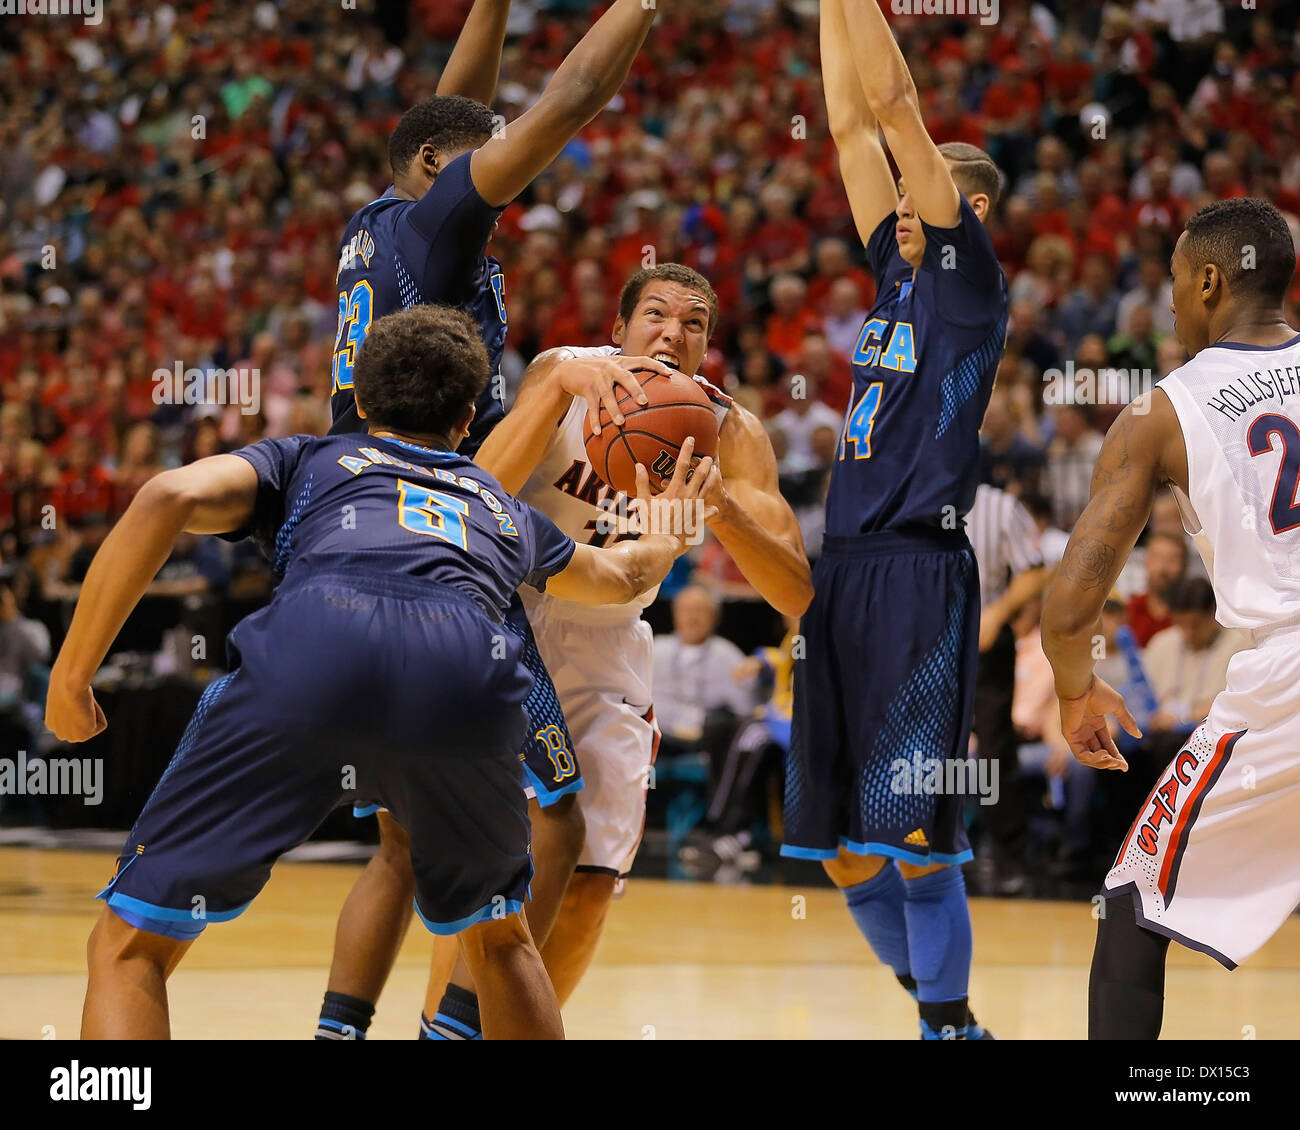 Las Vegas, NV, USA. 15th Mar, 2014. Mar 15 2014 - Las Vegas NV, U.S - Arizona F # 11 Aaron Gordon force his way to the hoop surrounded by UCLA players during NCAA Men's Basketball game between Arizona Wildcats and UCLA Bruins 71-75 lost at MGM Grand Garden Arena Las Vegas, NV Credit:  csm/Alamy Live News Stock Photo